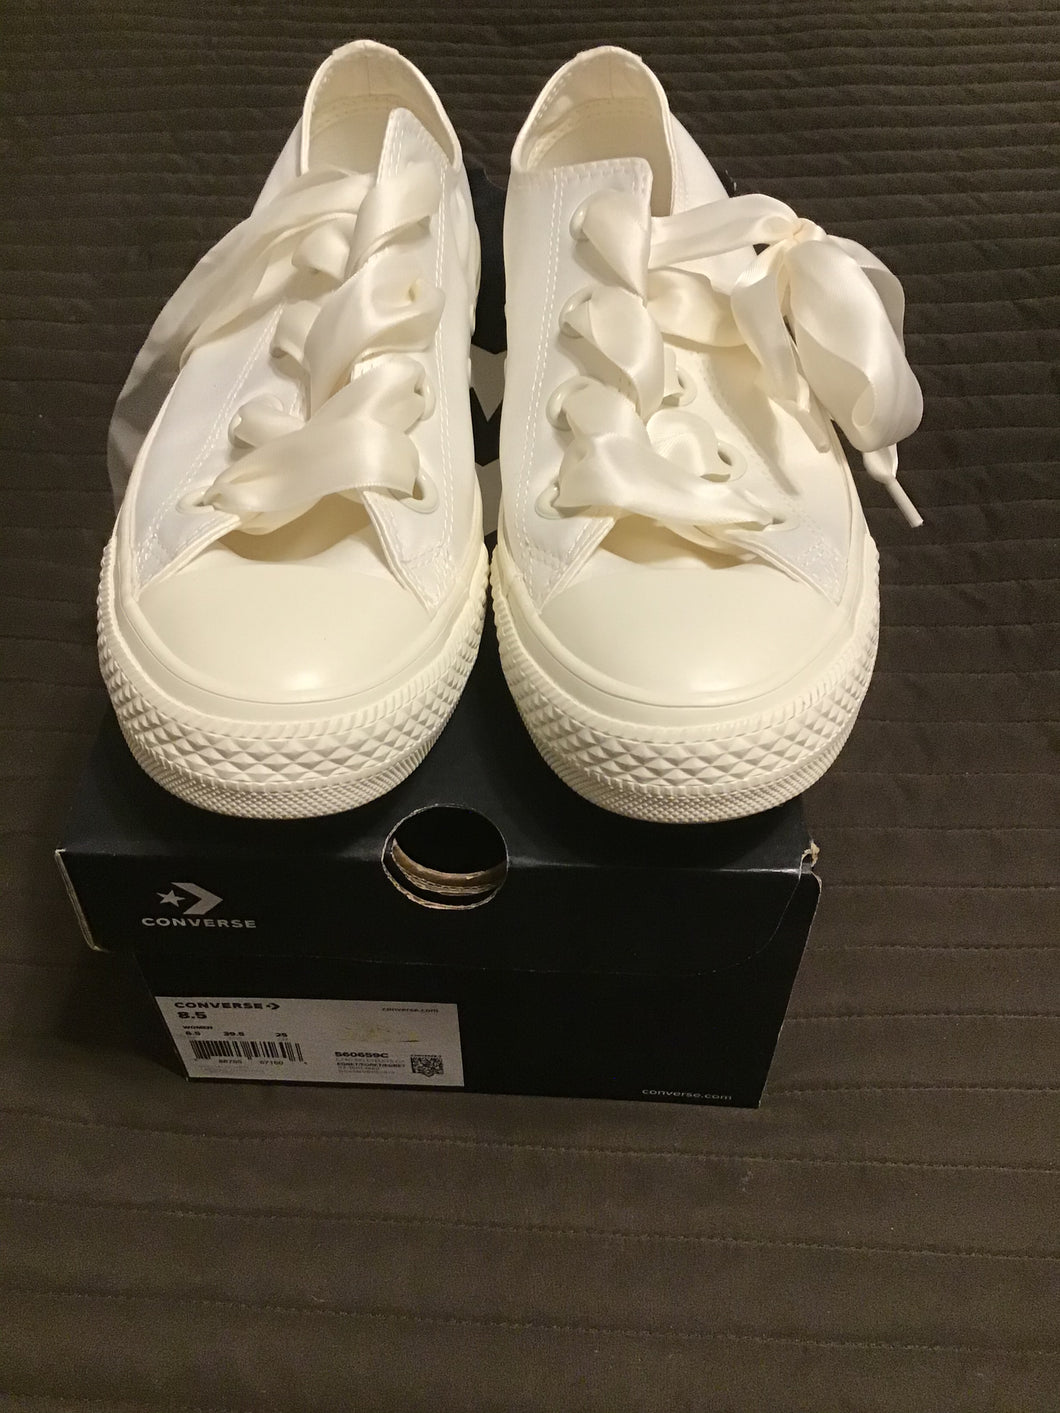 Converse Ivory Low Top Gym Shoes 8.5